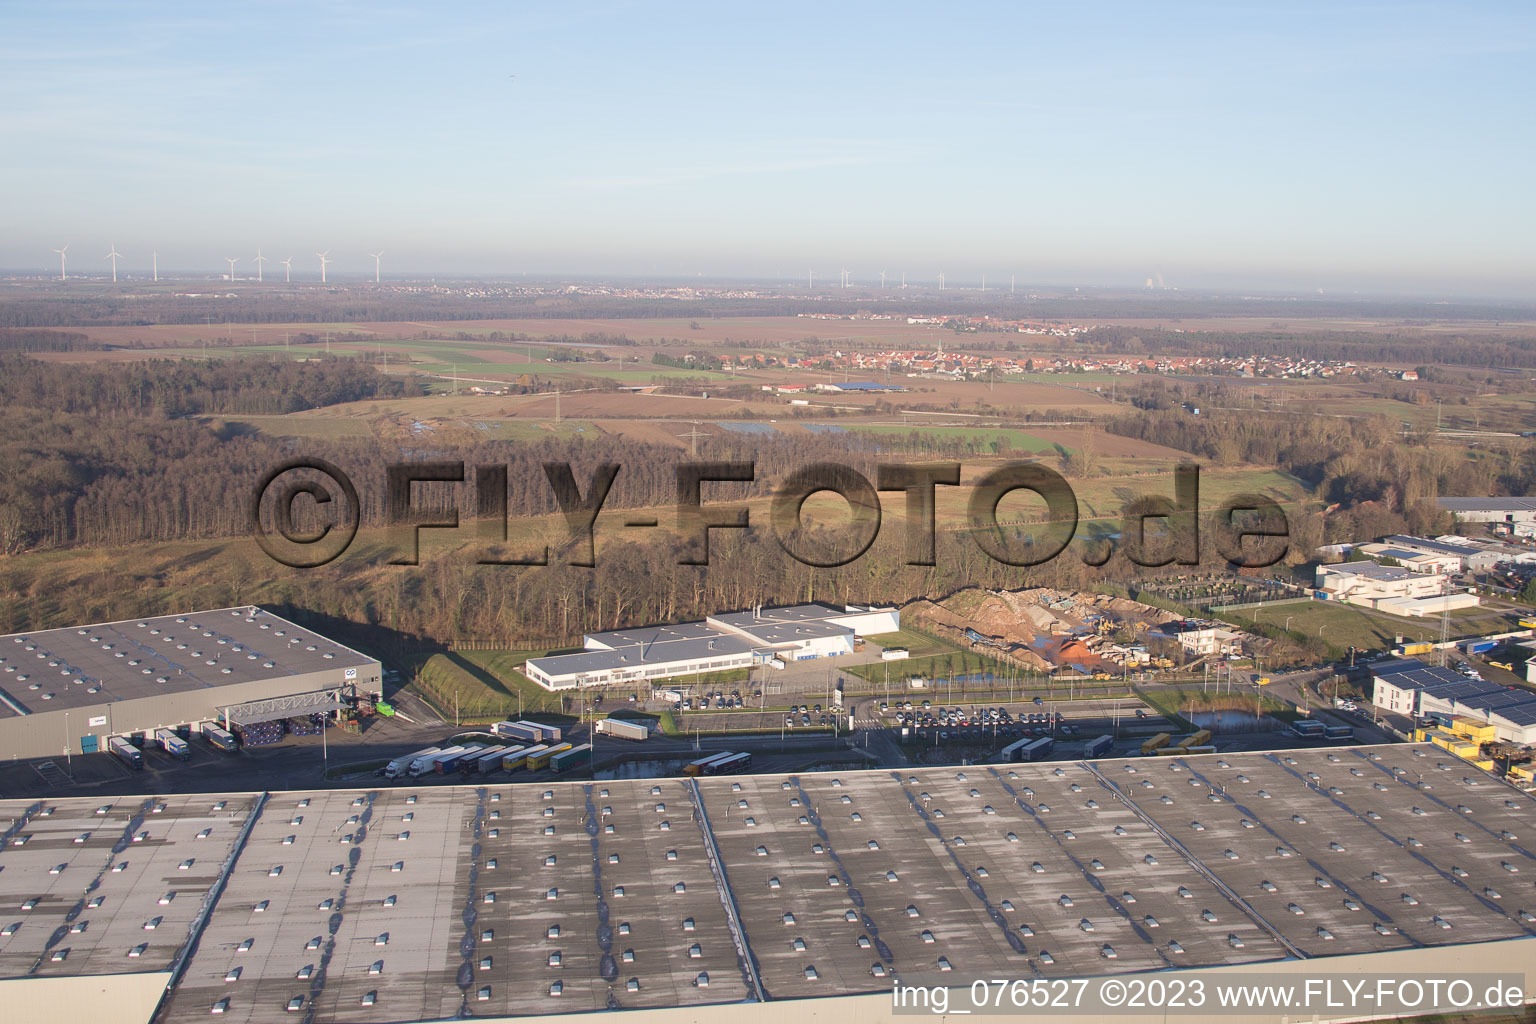 Horst industrial estate, Alfa Aesar GmbH in the district Minderslachen in Kandel in the state Rhineland-Palatinate, Germany seen from above